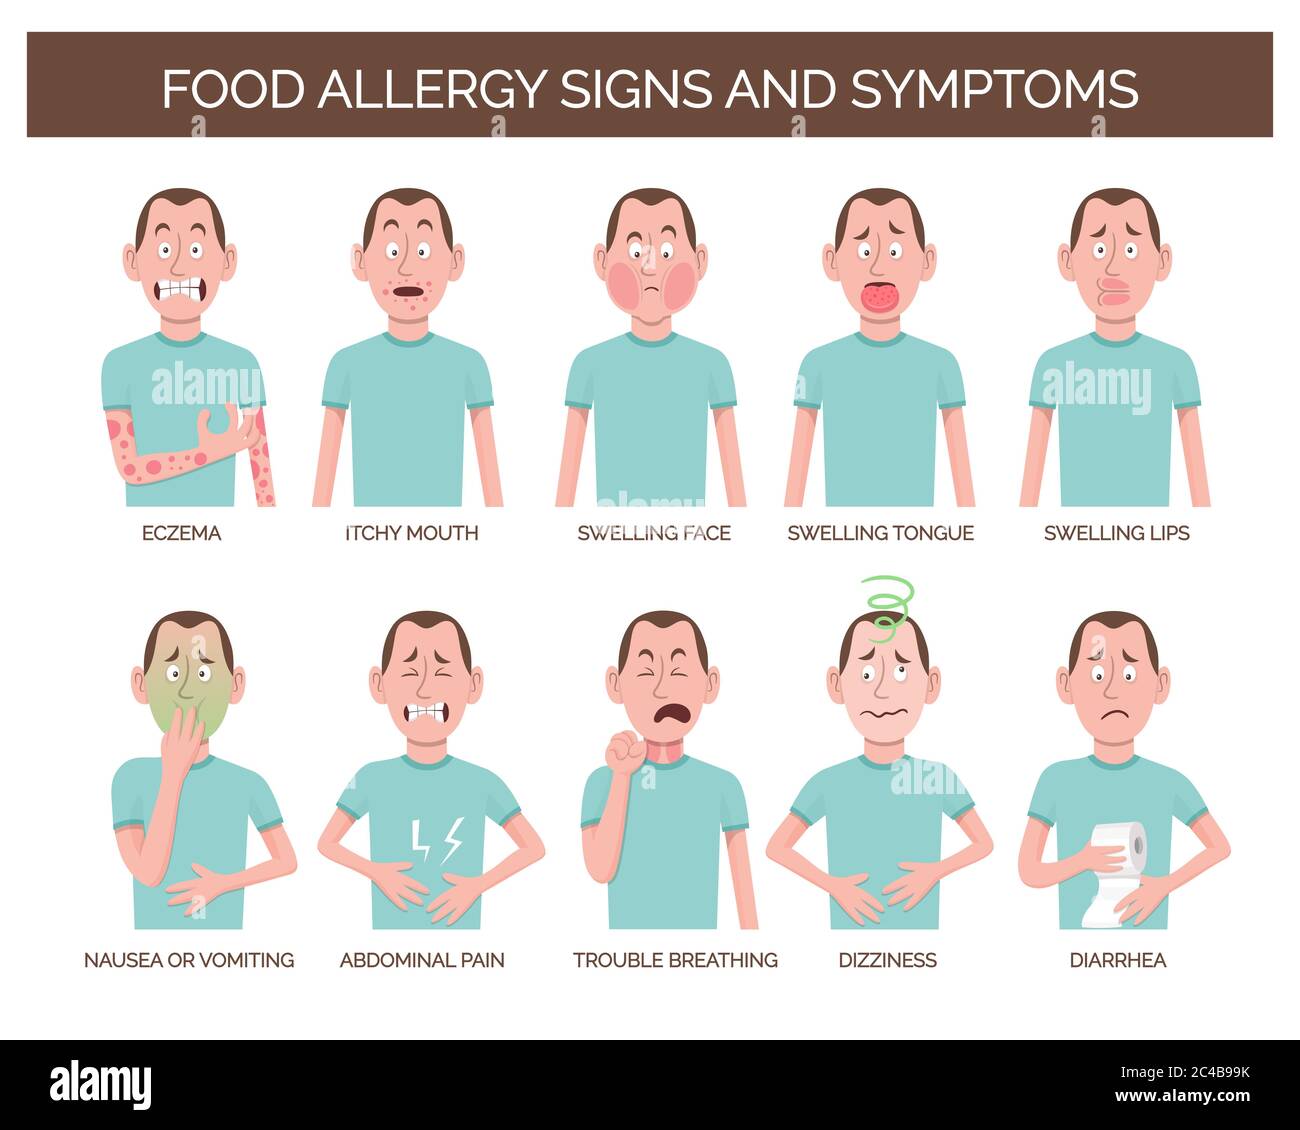 Cartoon character showing the most common food allergy signs and symptoms. Eczema, abdominal pain, dizziness, vomiting and diarrhea. Vector illustrati Stock Vector